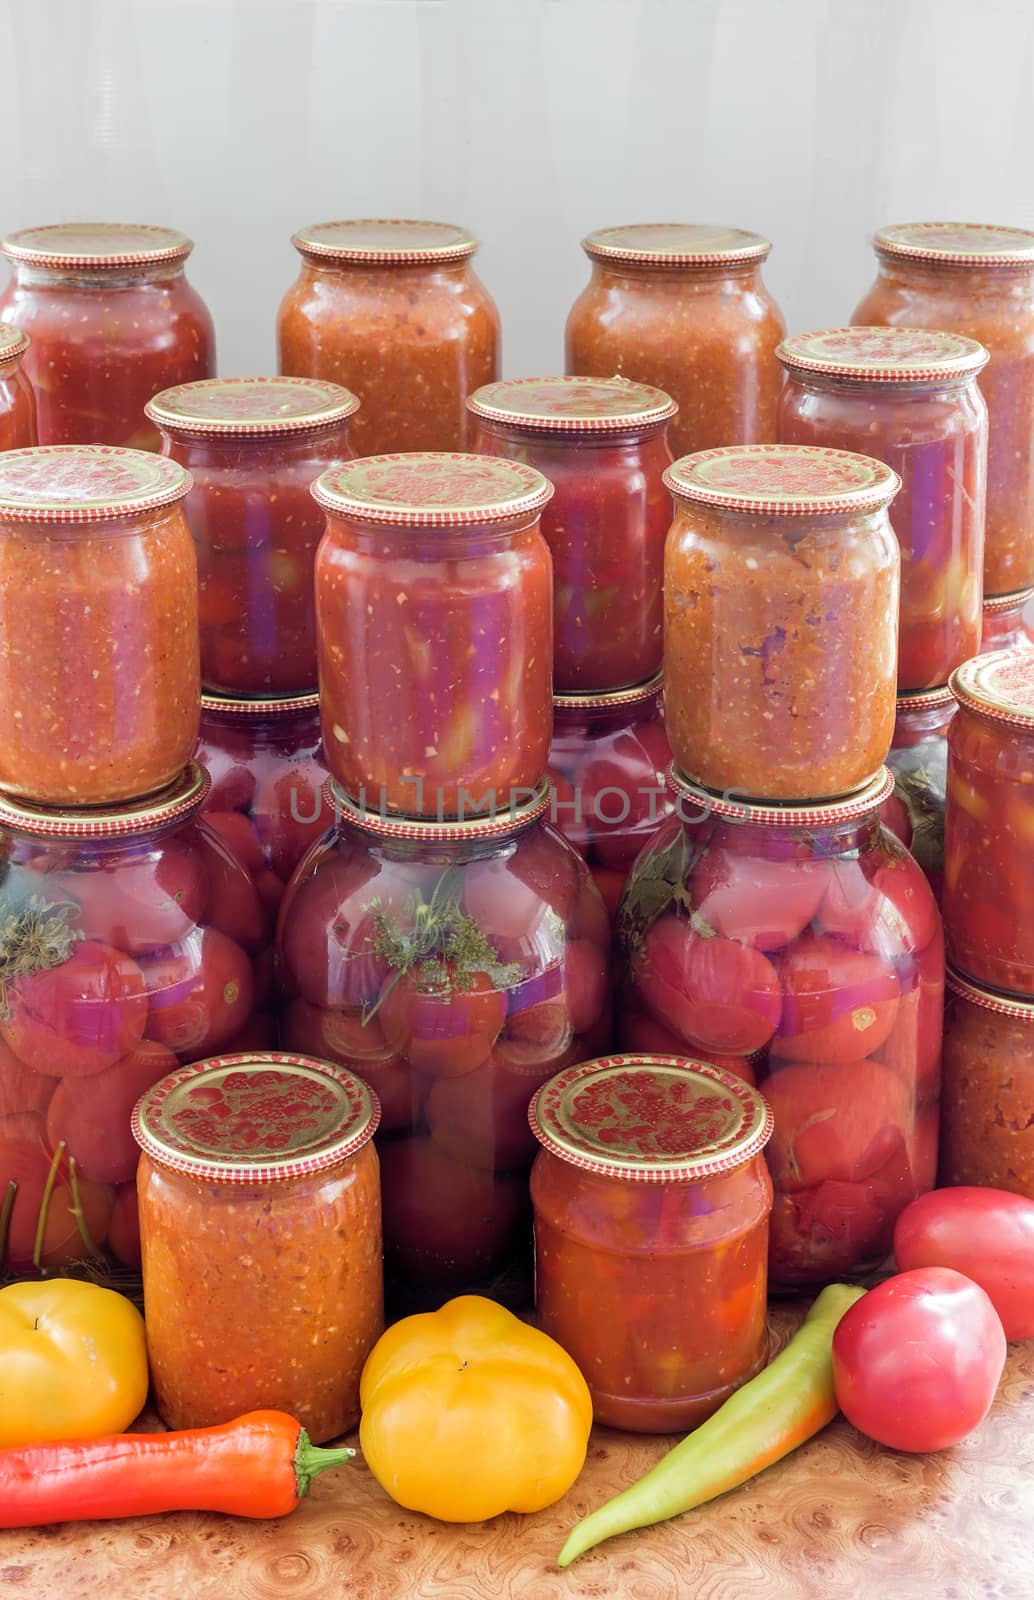 Home canning: canned vegetables in glass jars by georgina198